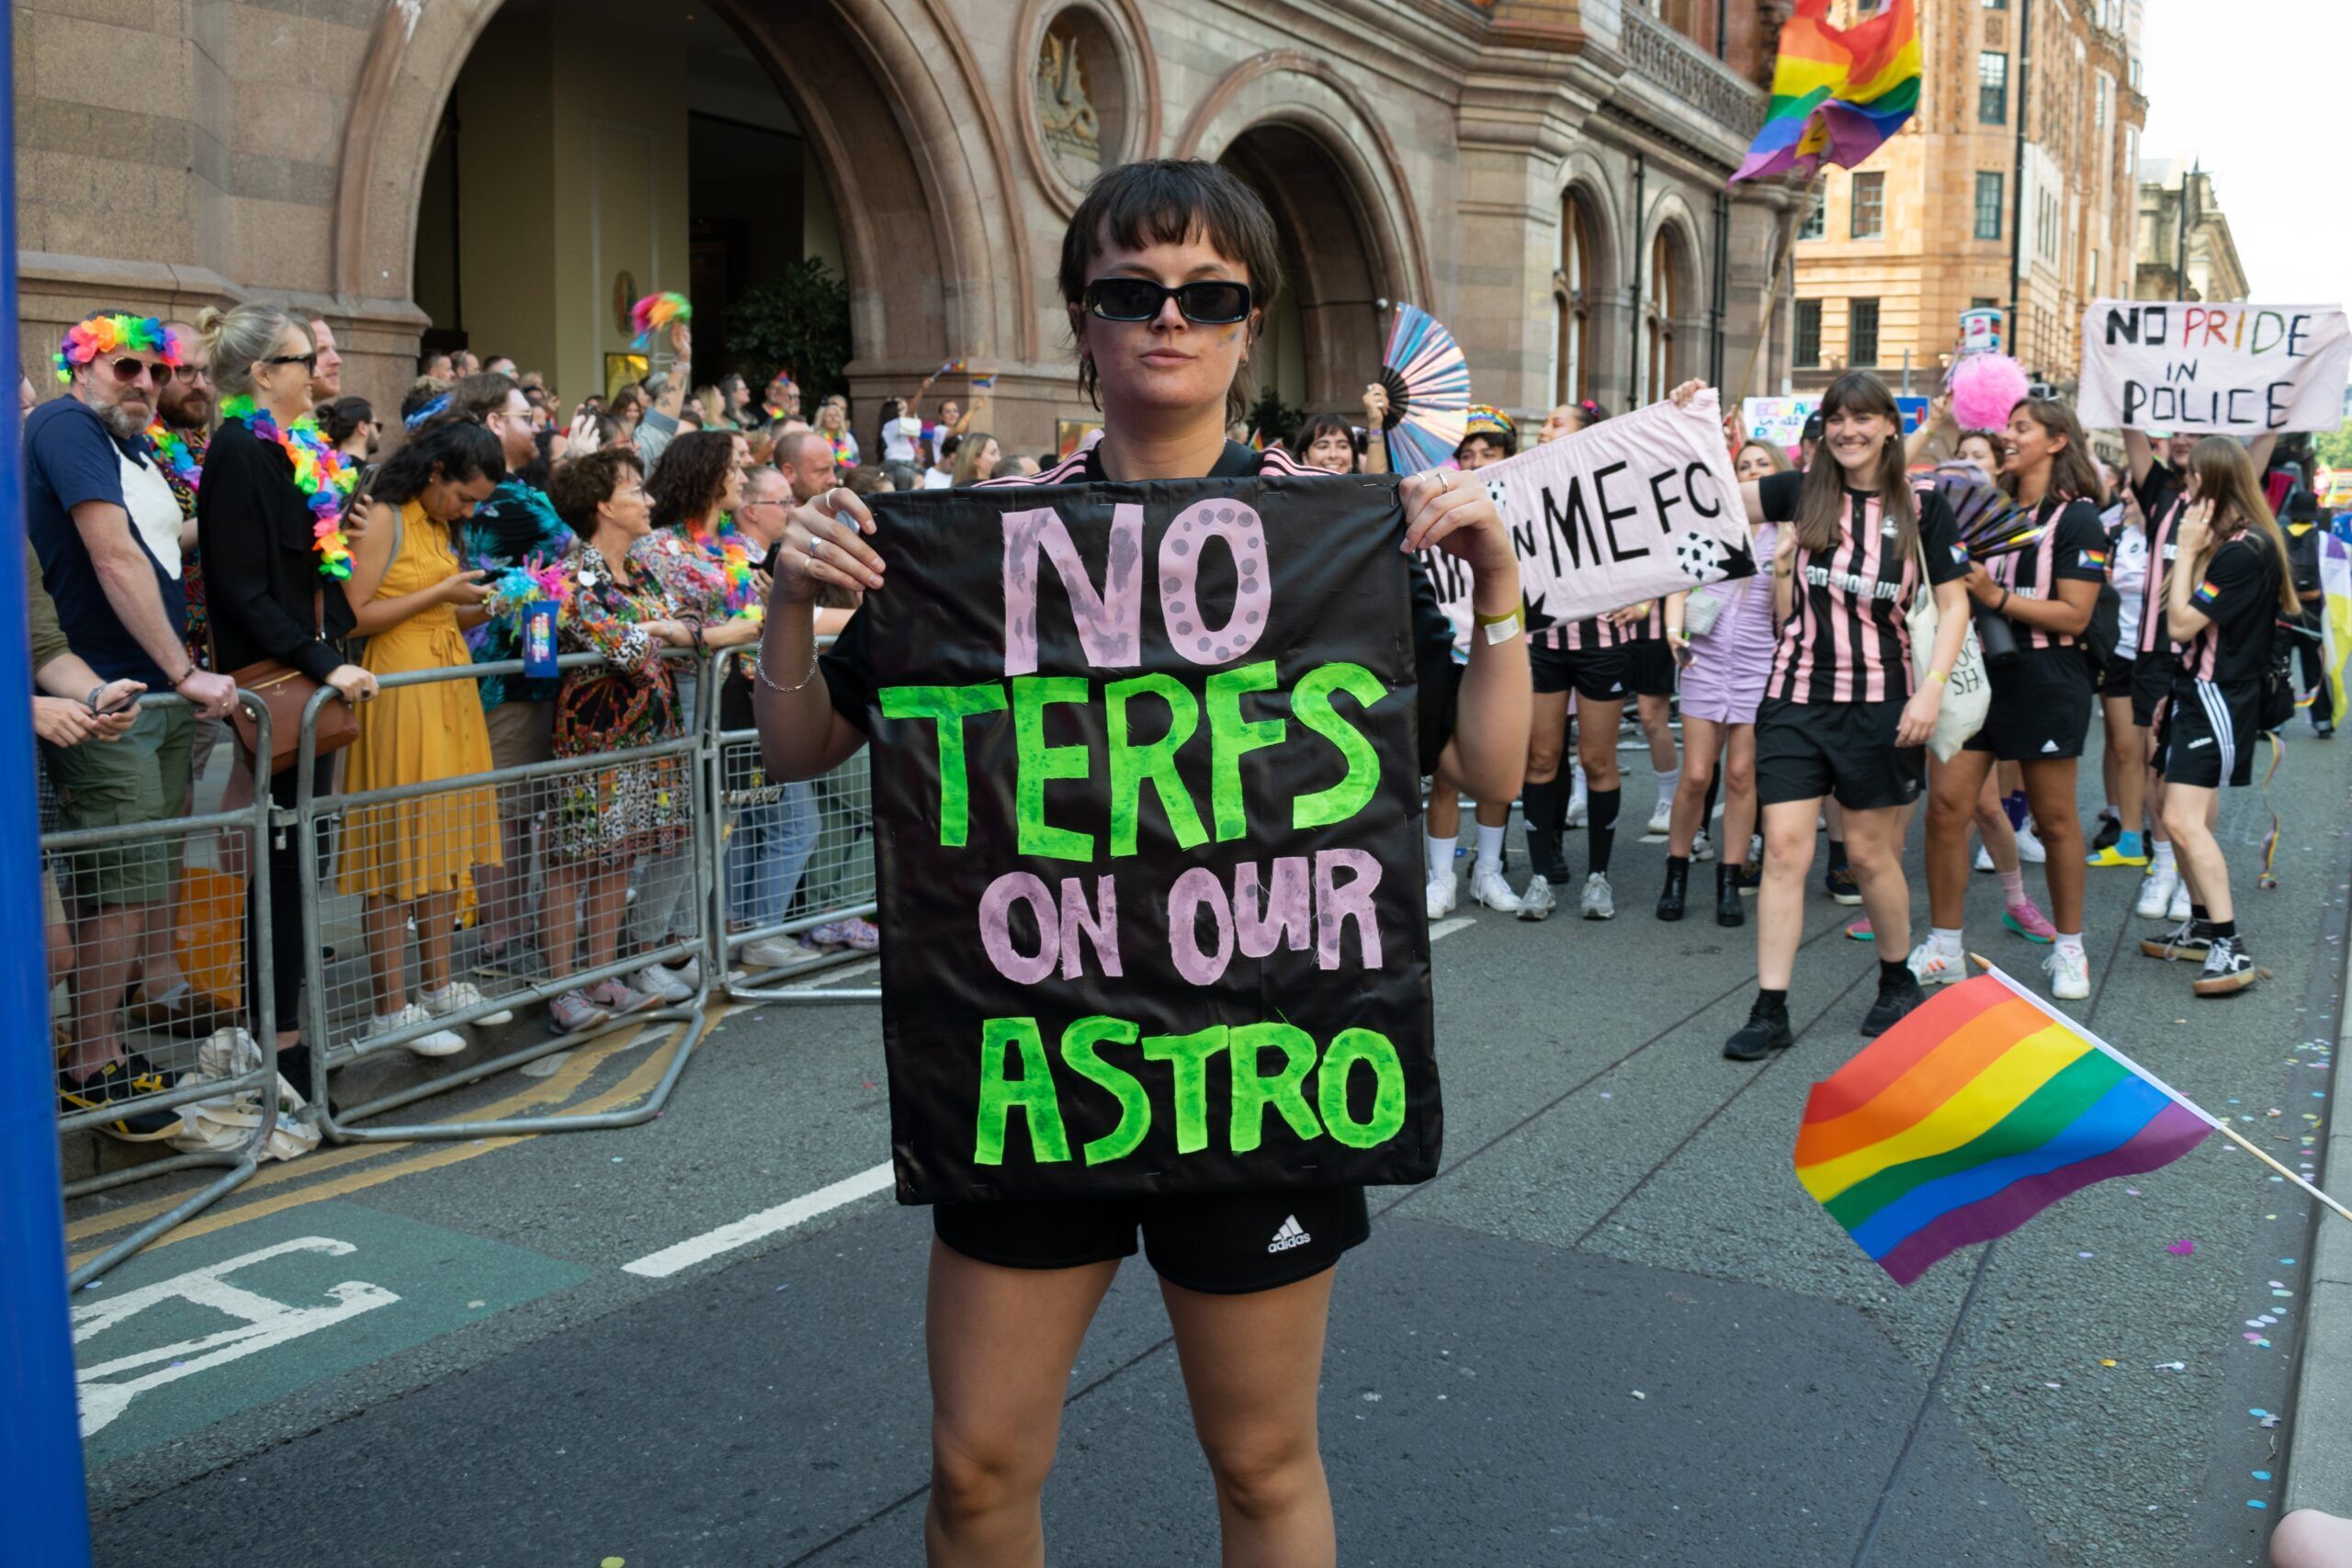 a protestor with a sign that says "No terfs on our astro"